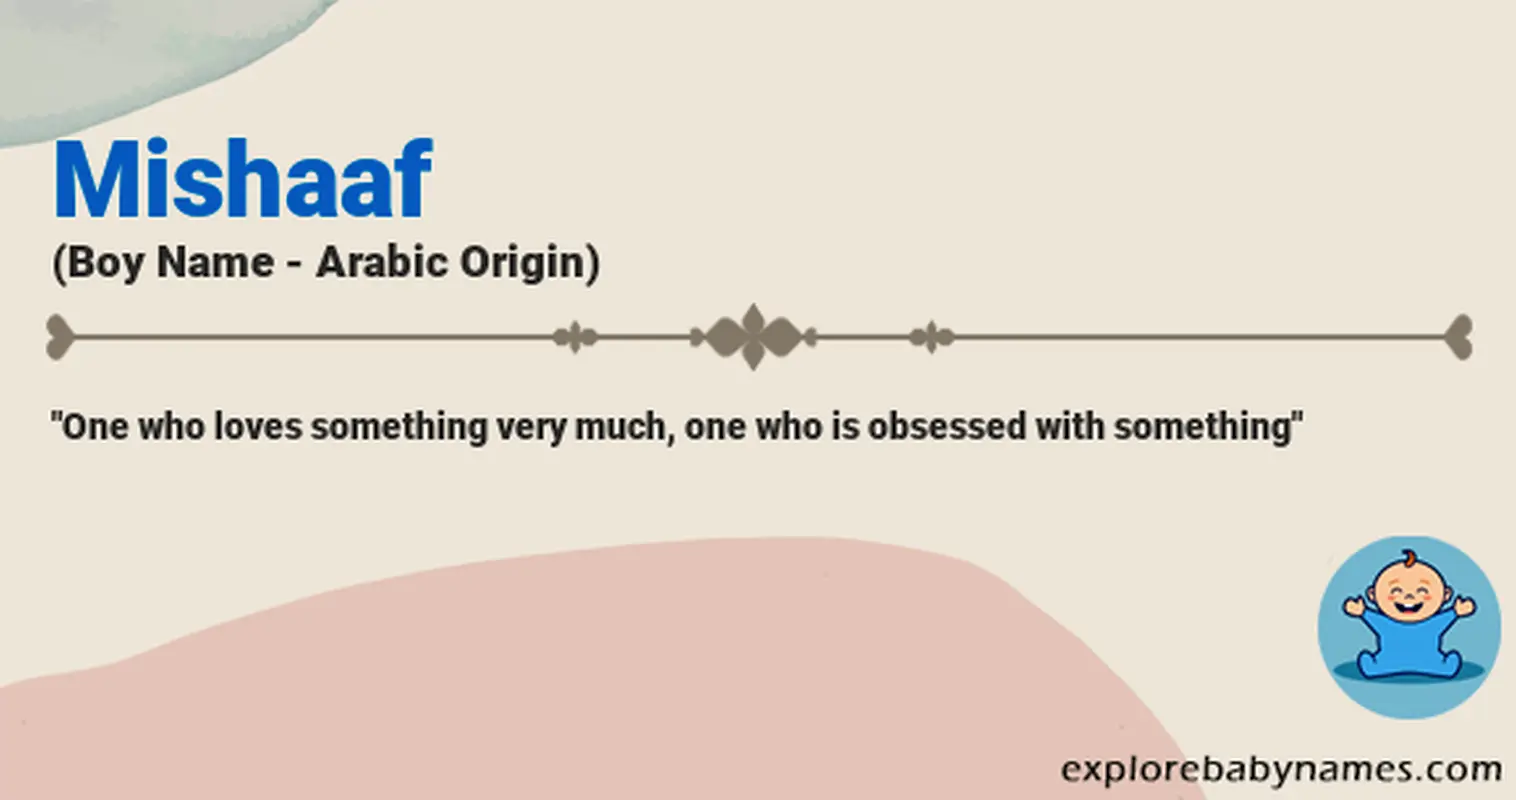 Meaning of Mishaaf